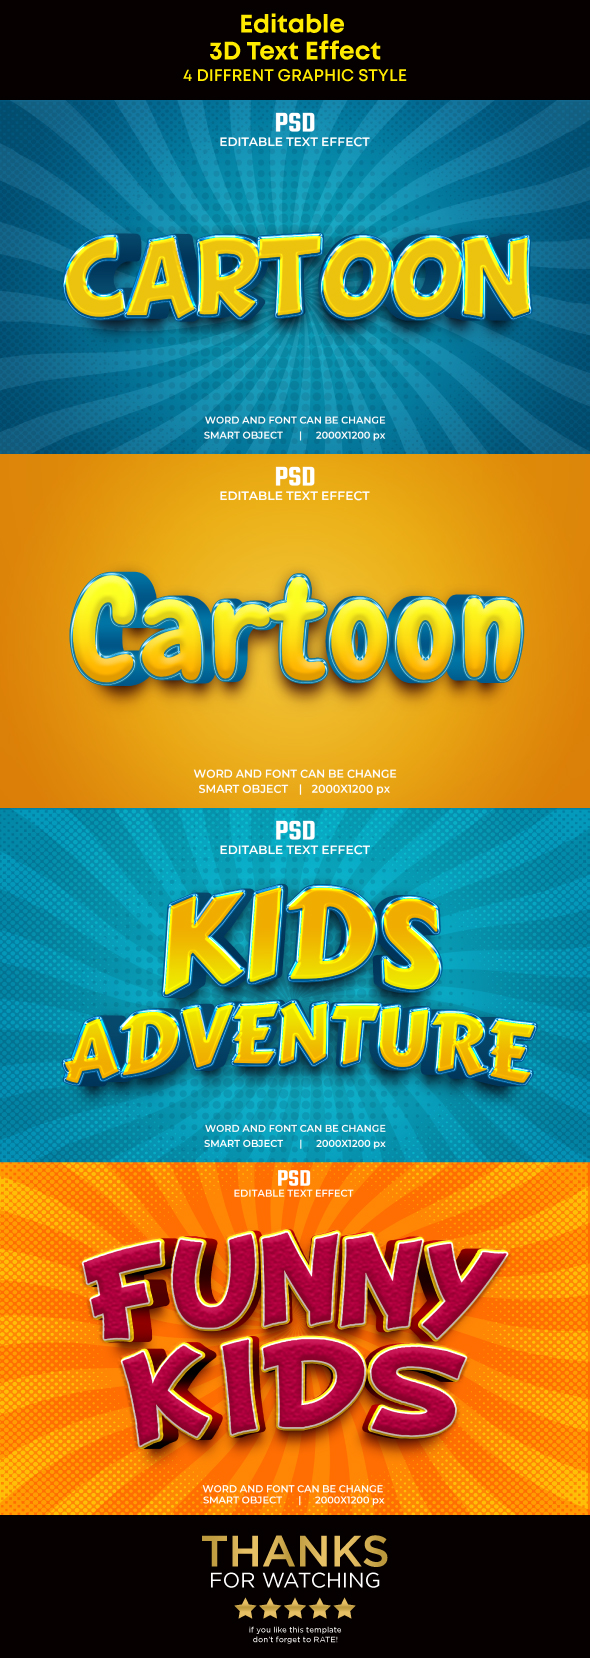 [DOWNLOAD]4 Cartoon Style 3D Editable Text Effect with Background